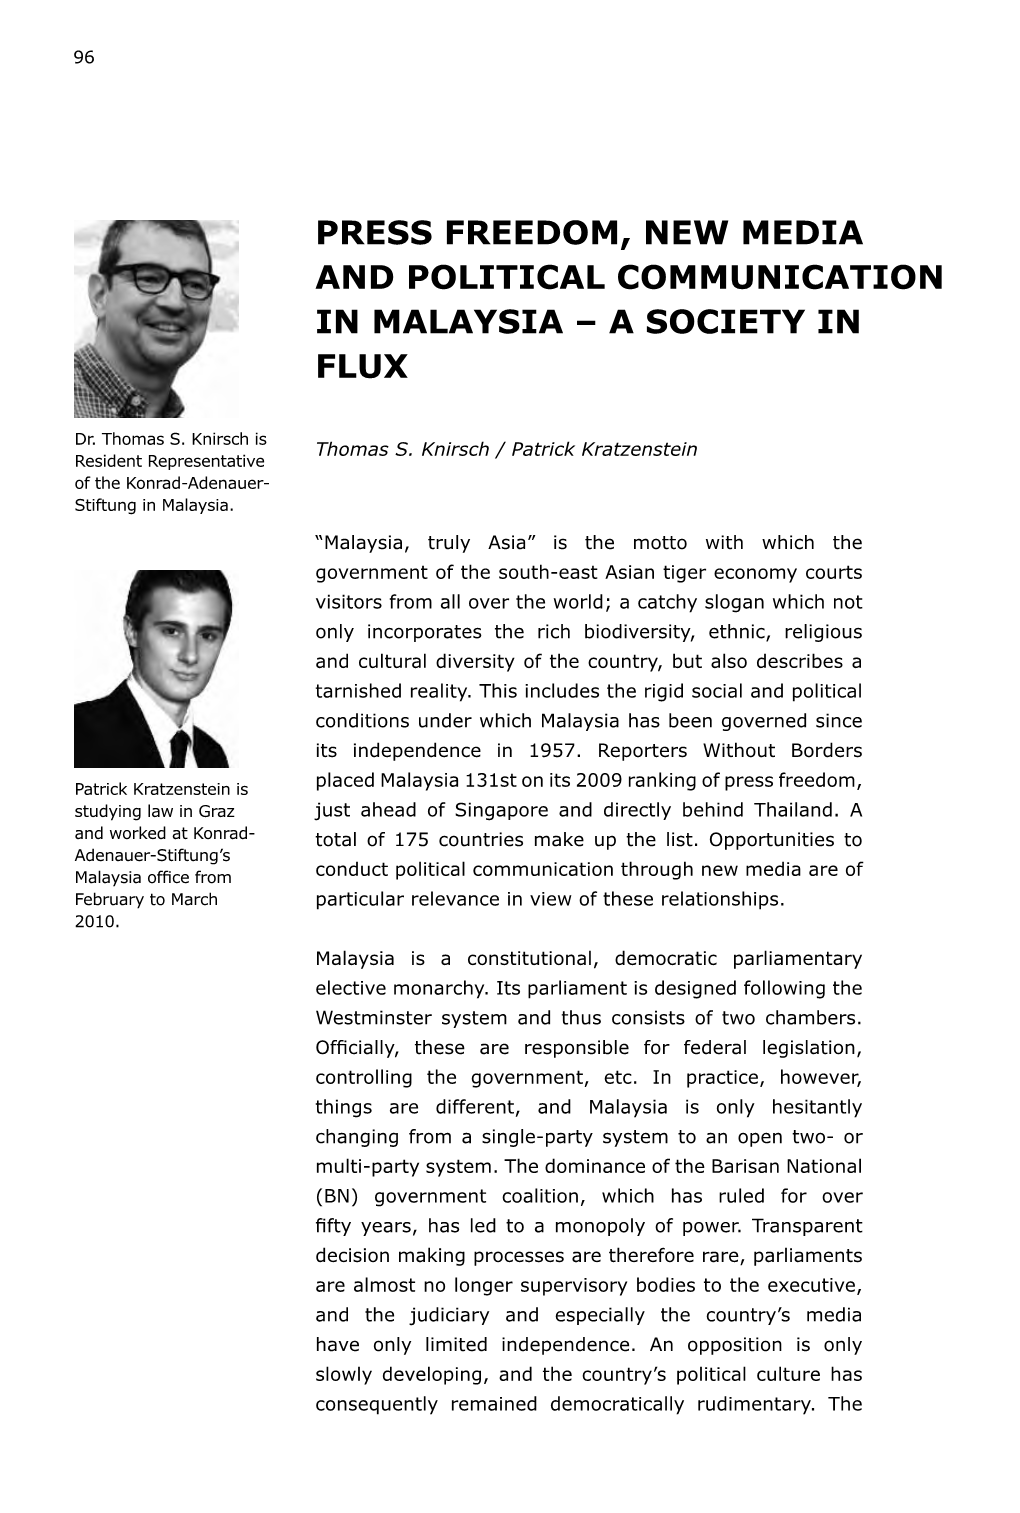 Press Freedom, New Media and Political Communication in Malaysia – a Society in Flux